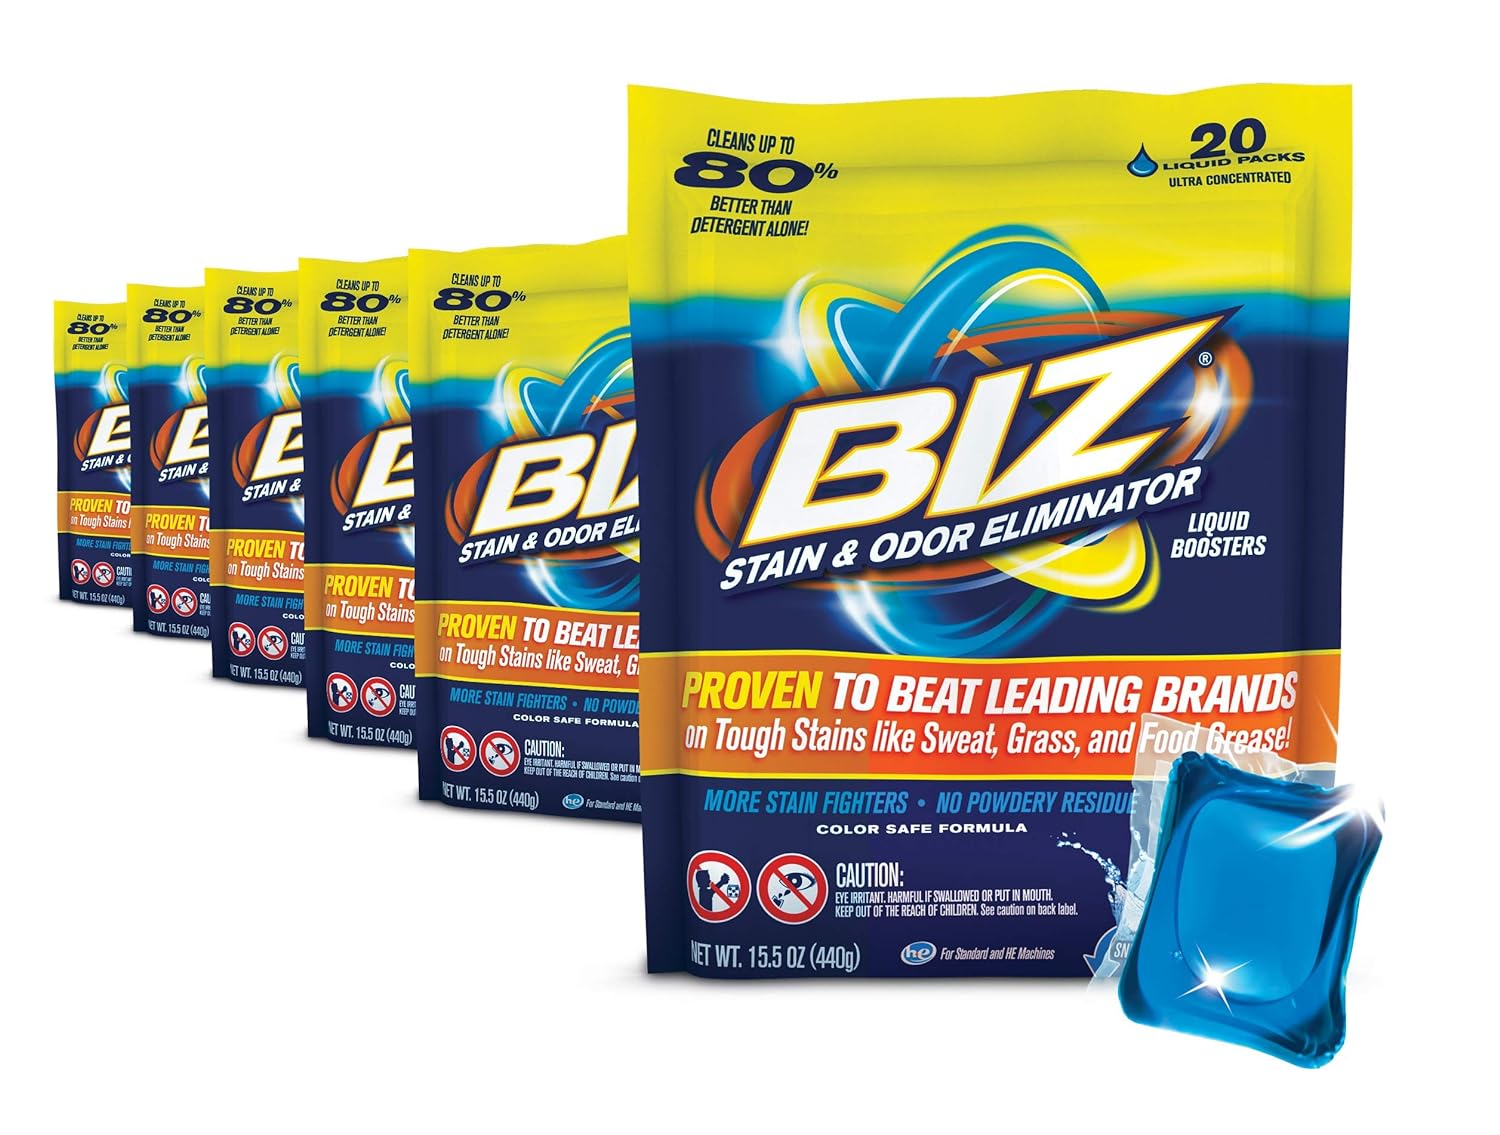 Biz Laundry Detergent Liquid Boosters, Stain & Odor Removal - 20-Count